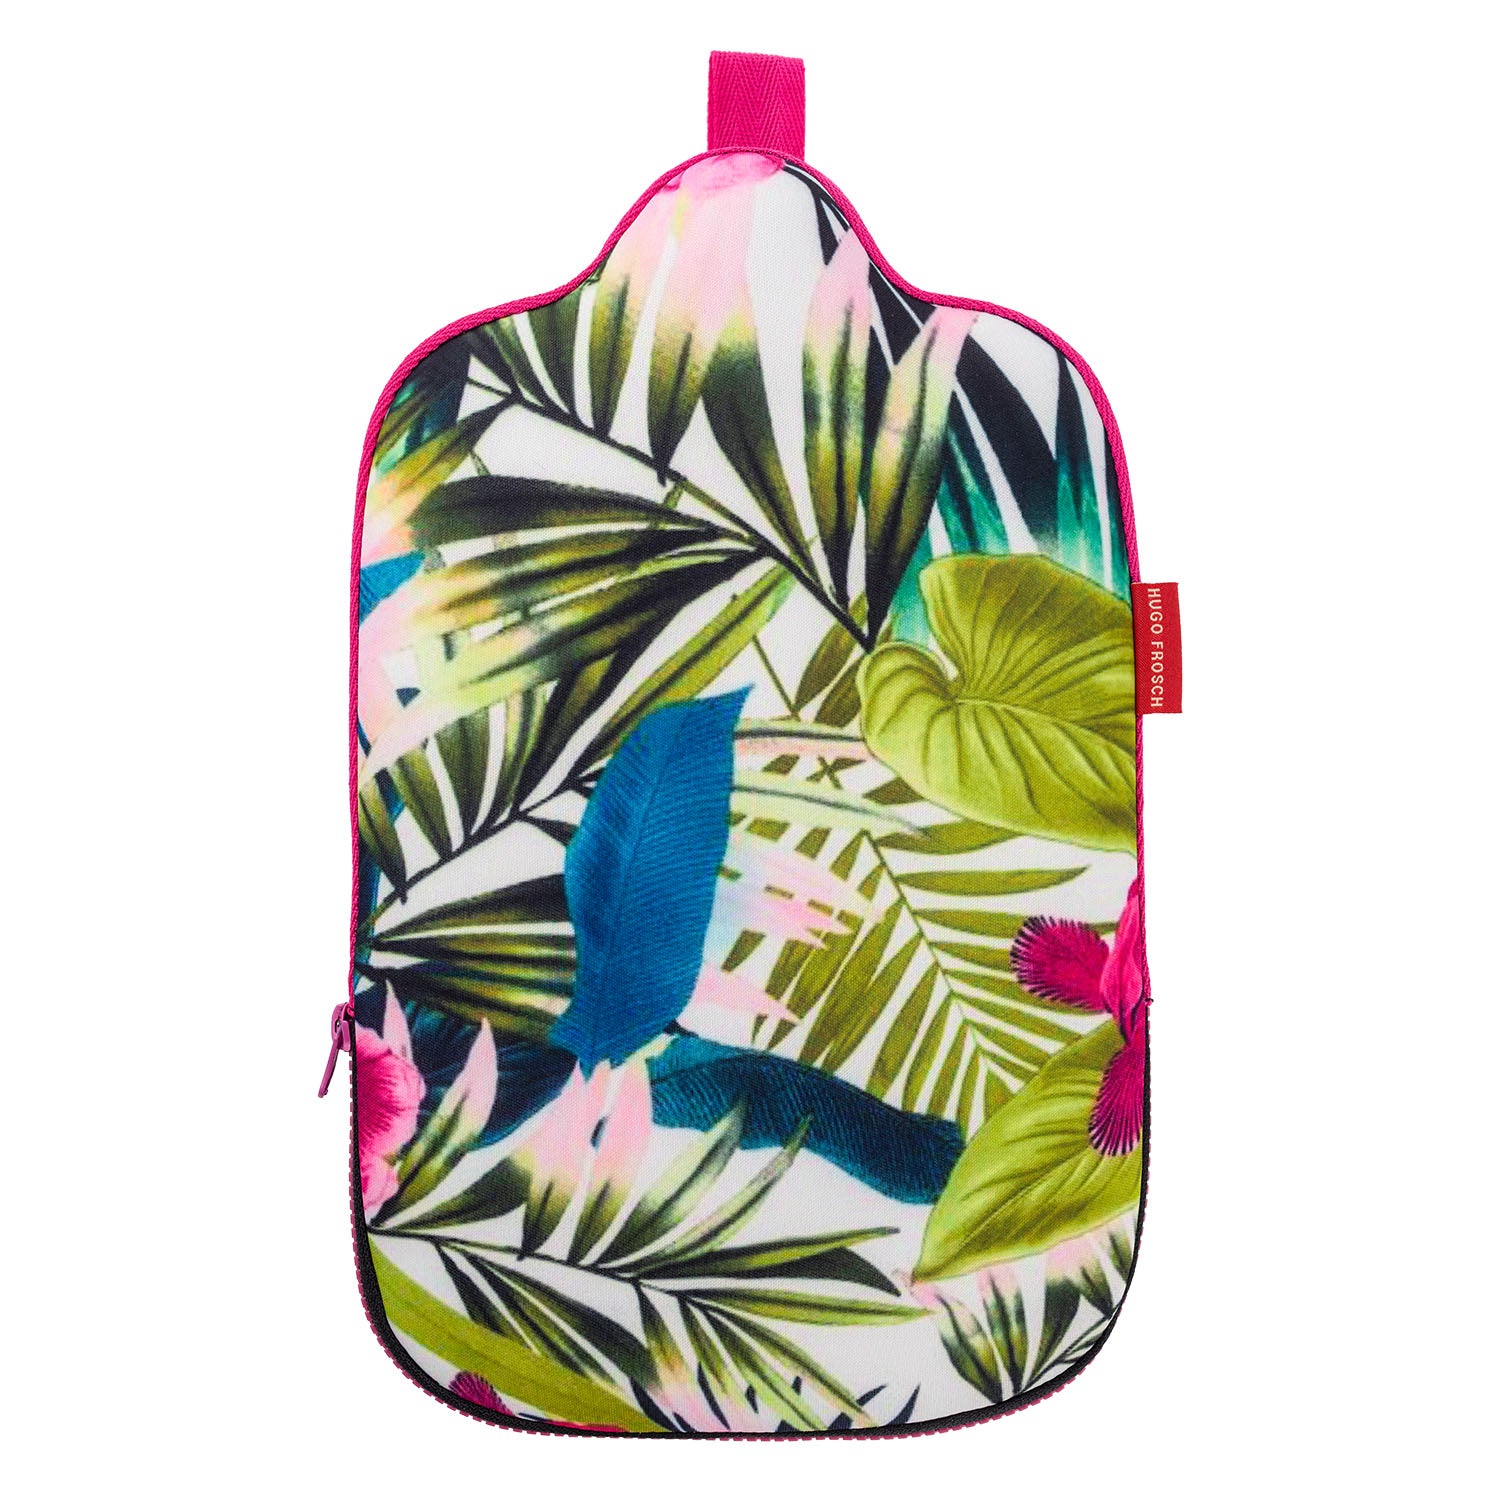 2 Litre Eco Hot Water Bottle with Jungle Print Zip Cover (rubberless)